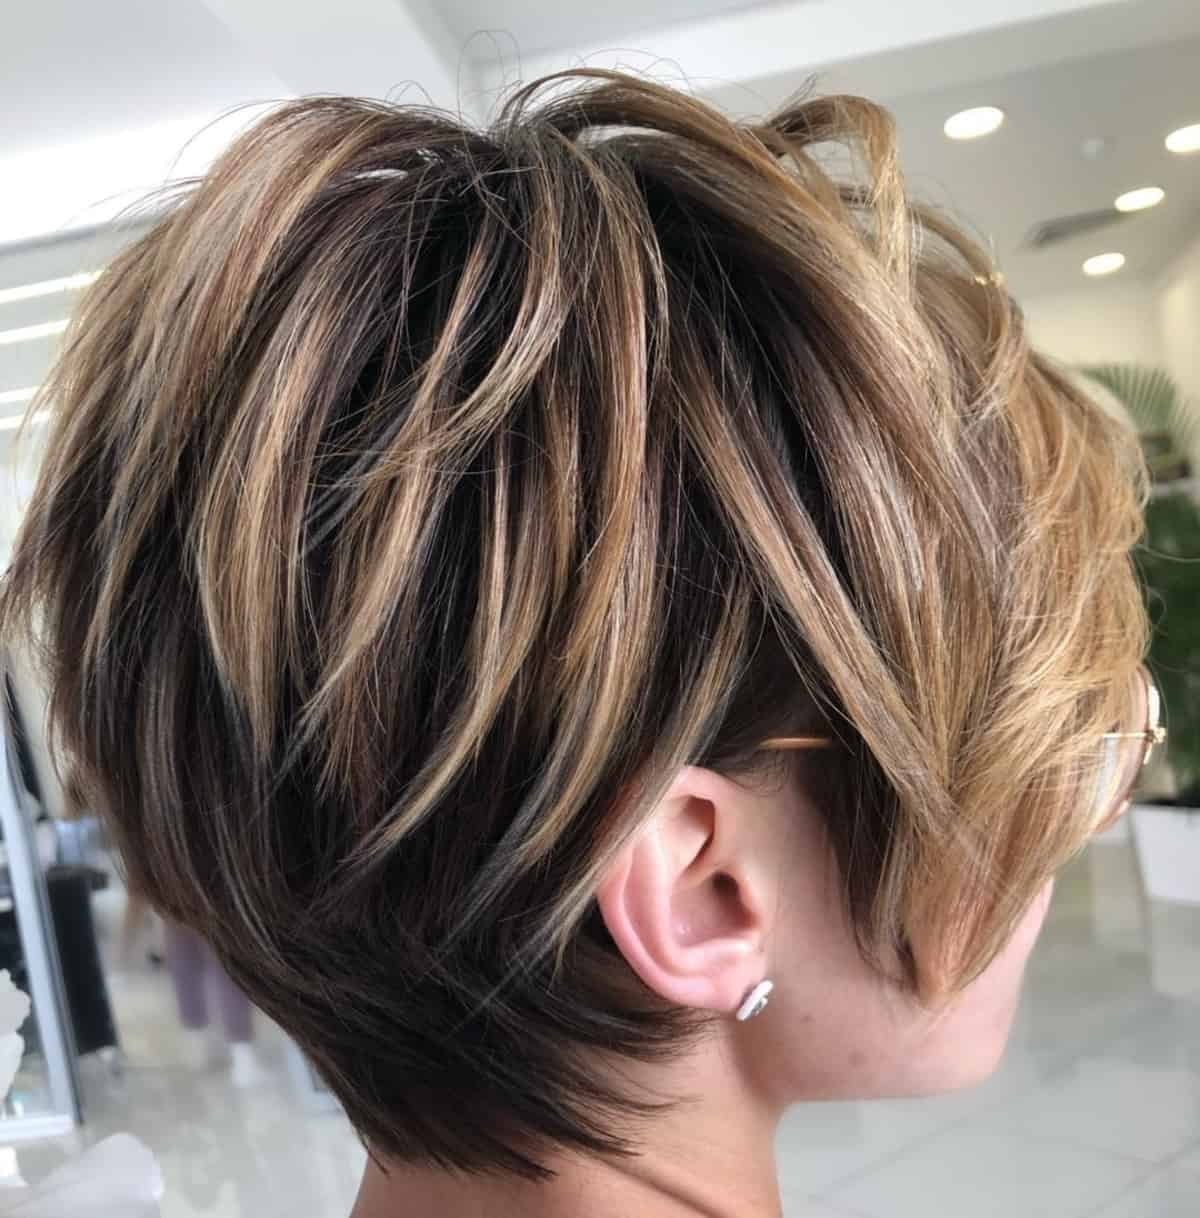 40+ Age-defying short bobs for women over 50